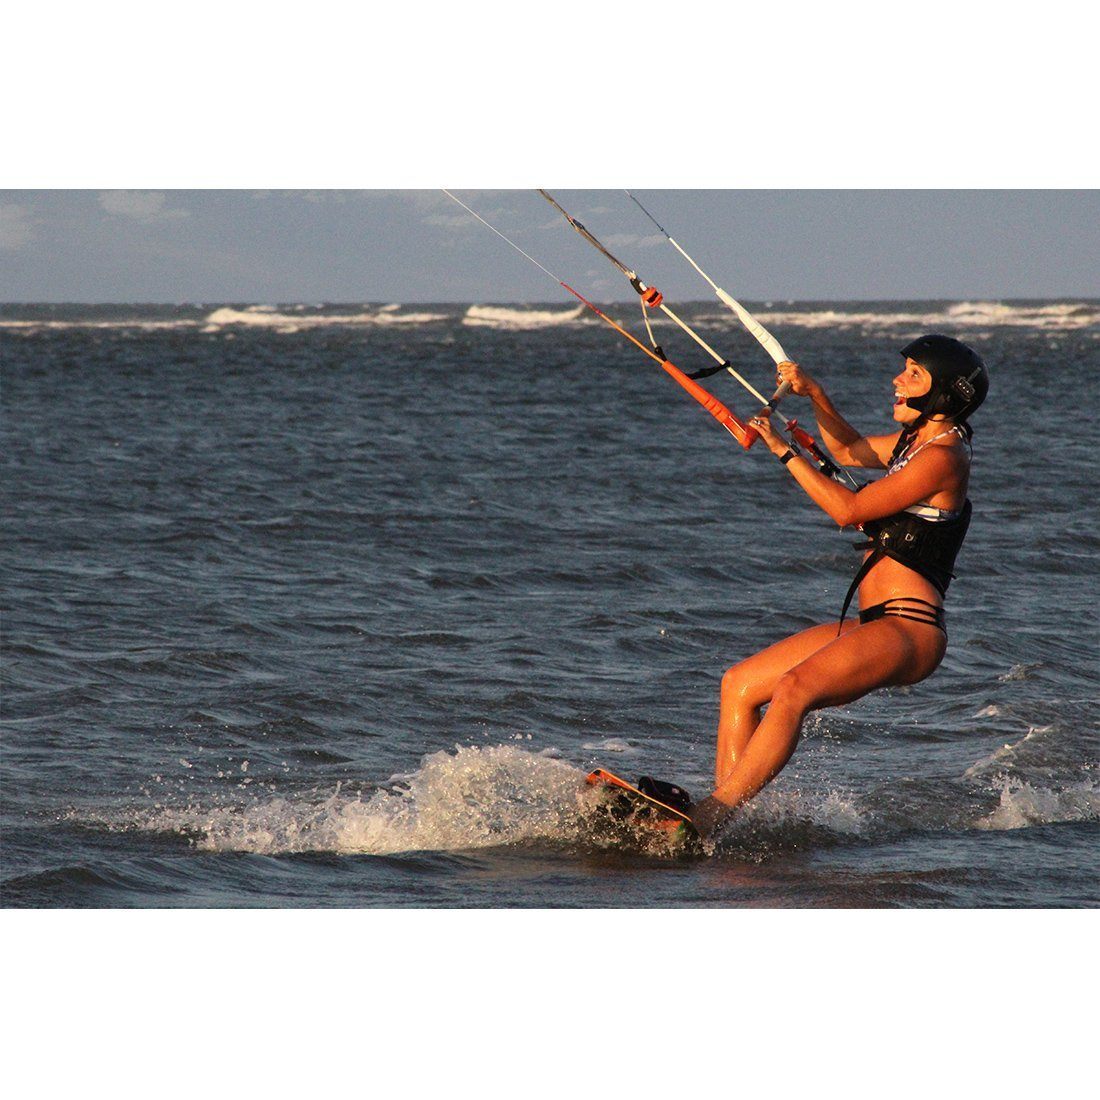 Session Sports Board Session Kiteboarding Lesson | 3HR Service